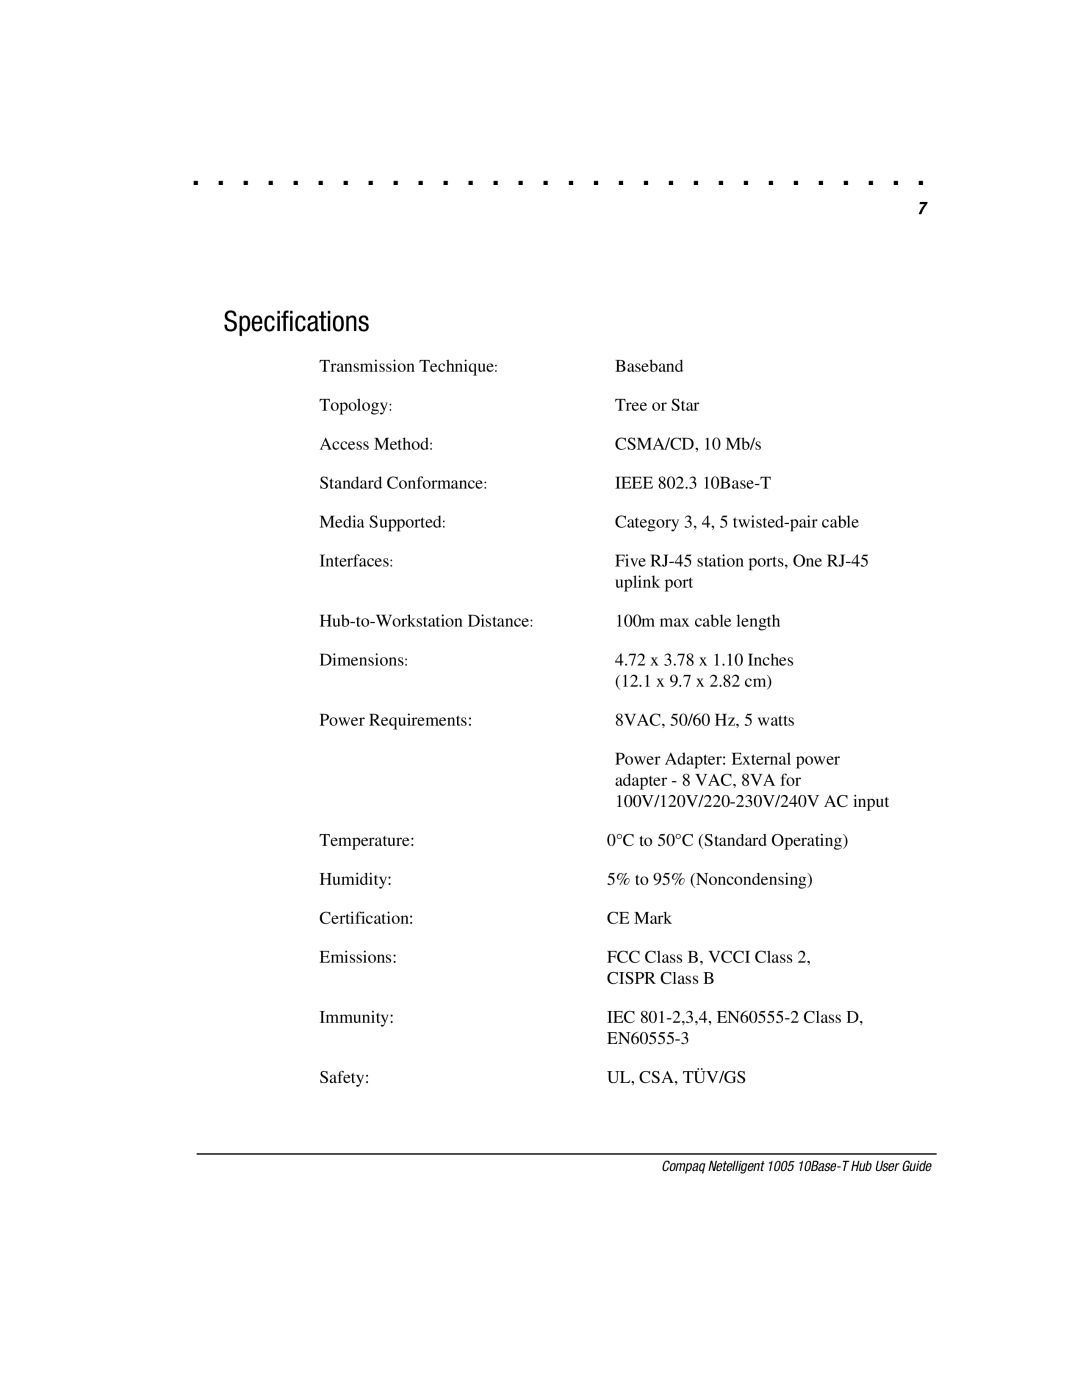 Compaq 1005 manual Specifications 